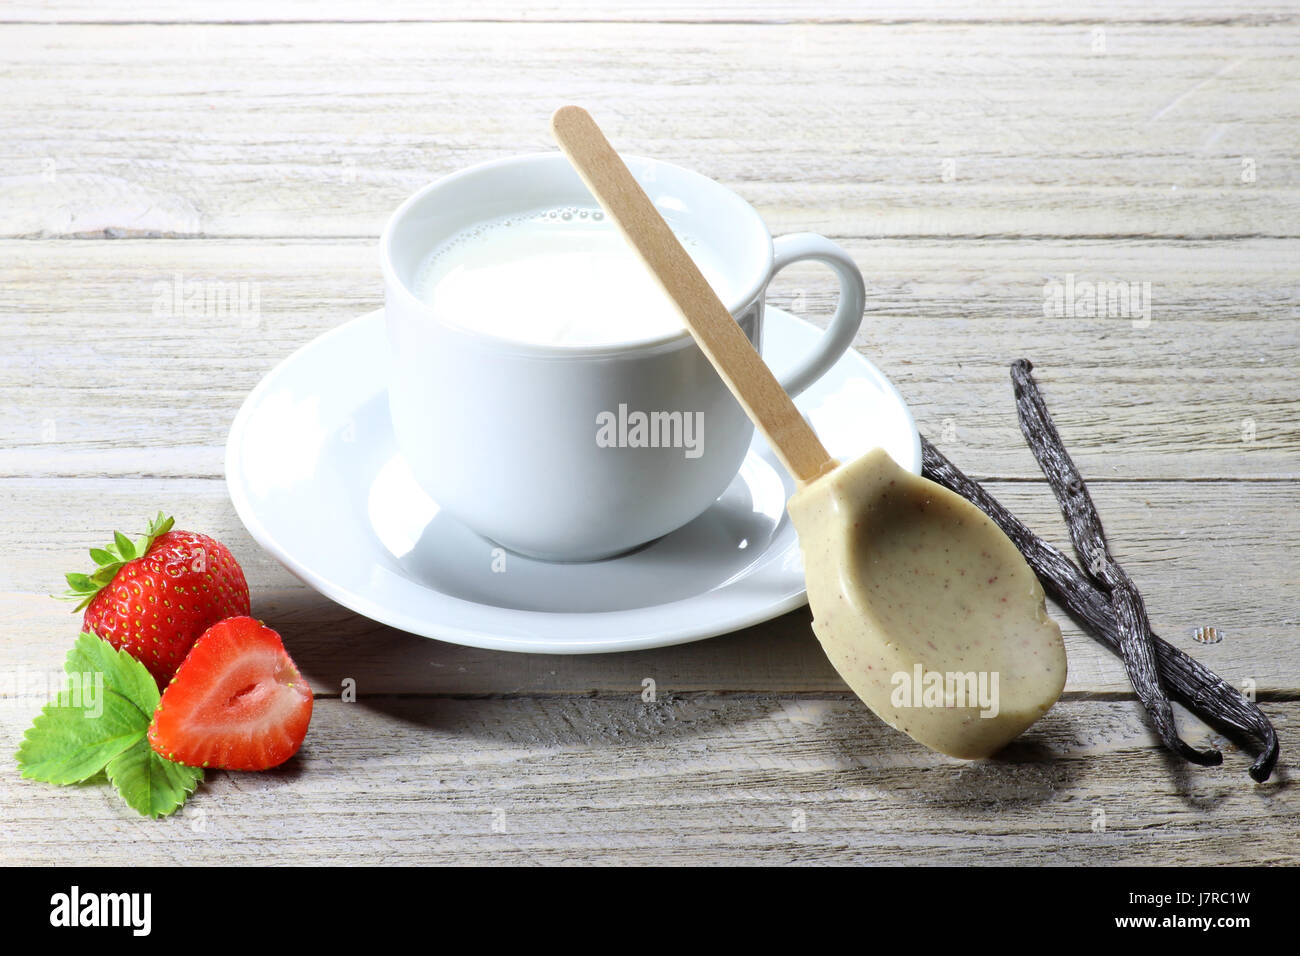 milk being prepared for a hot chocolate with strawberry flavor Stock Photo